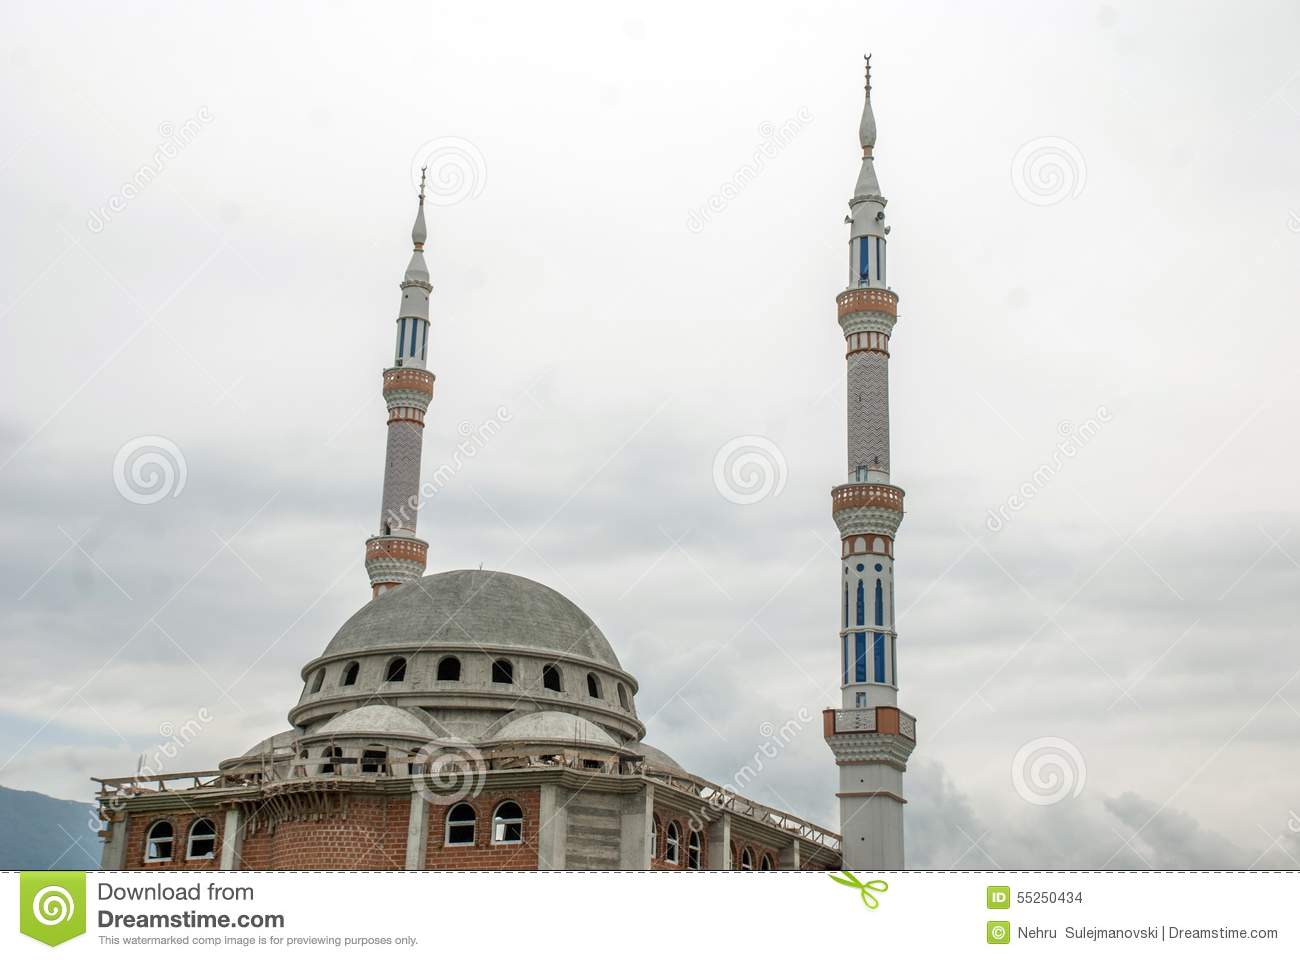 Nice Images Collection: Mosque Of Two Minarets Desktop Wallpapers